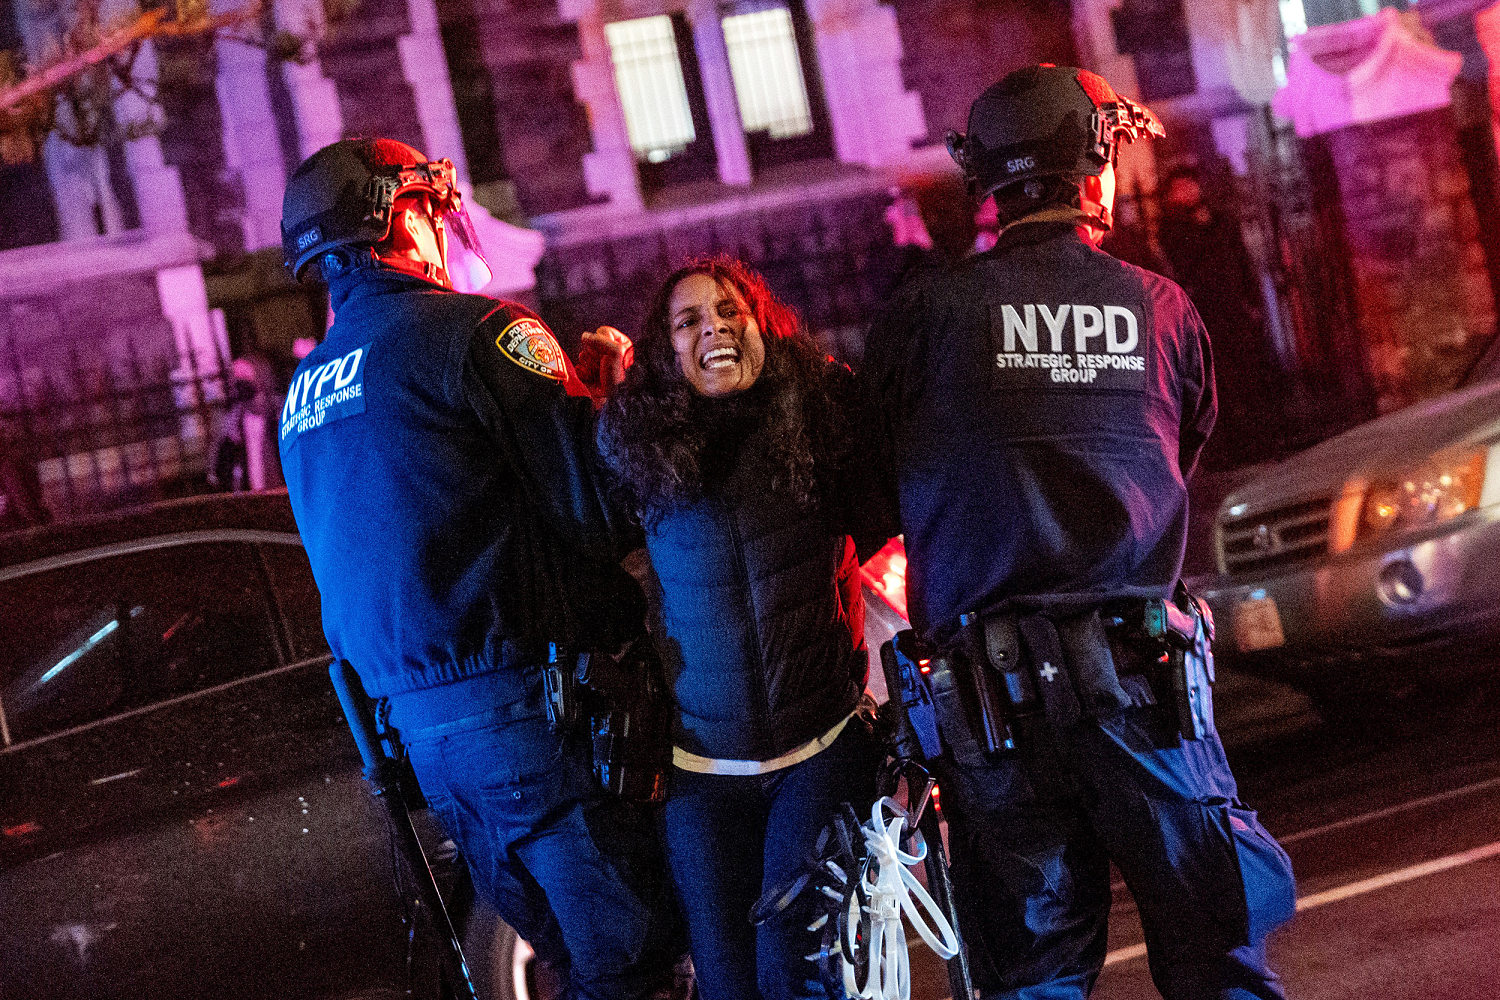 Columbia building occupation led by outsiders, mayor says; nearly 300 arrested on N.Y. campuses